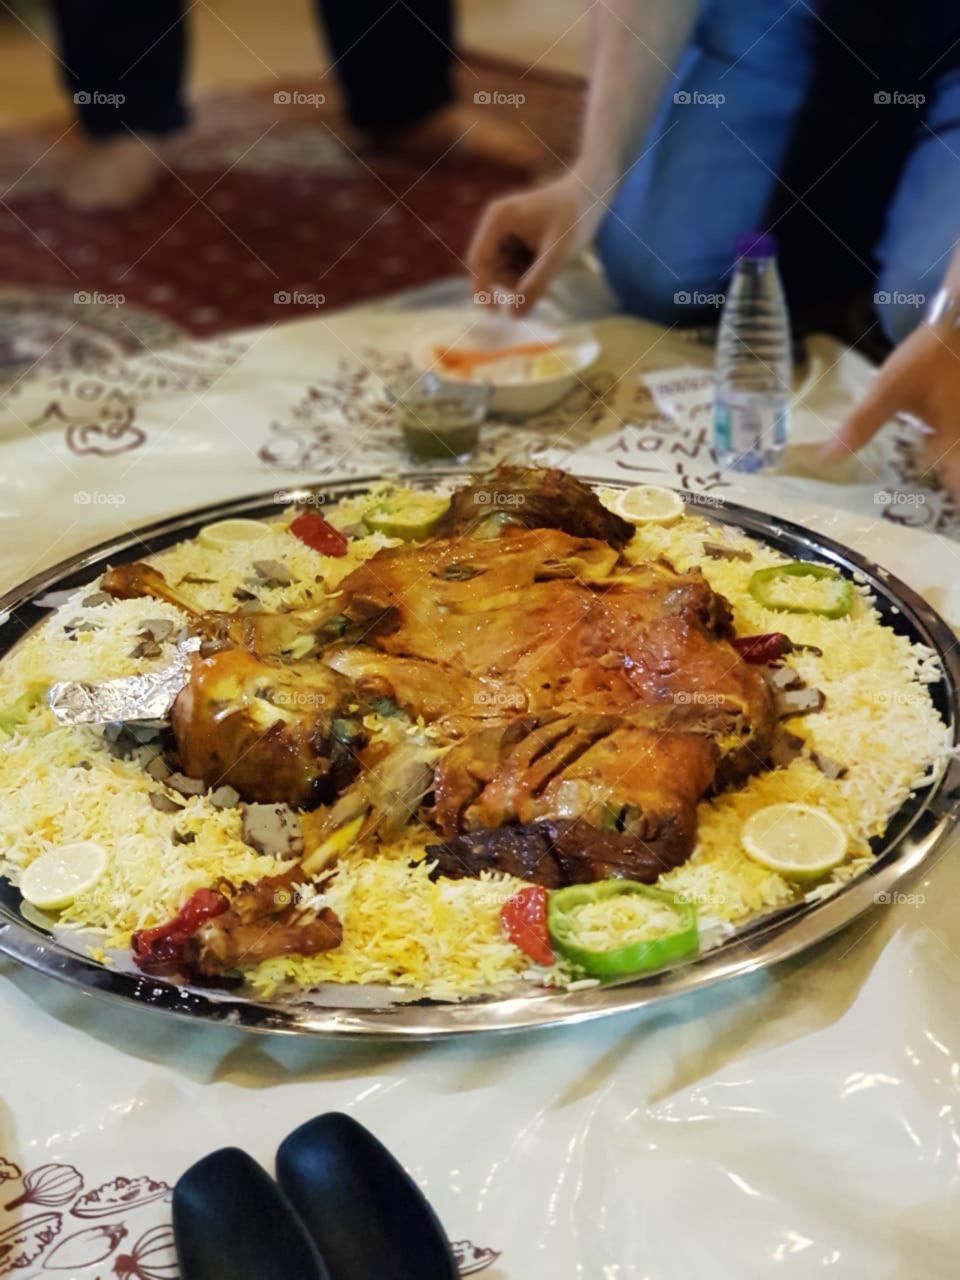 Laham Mandi or Lamb Mandi is a Saudi Arabian Traditional dish which is also very popular in other middle eastern countries like United Arab Emirates, Qatar, Kuwait, Oman and yemen. Serving in a huge plate is called "Dhabiha" or sacrifised :).